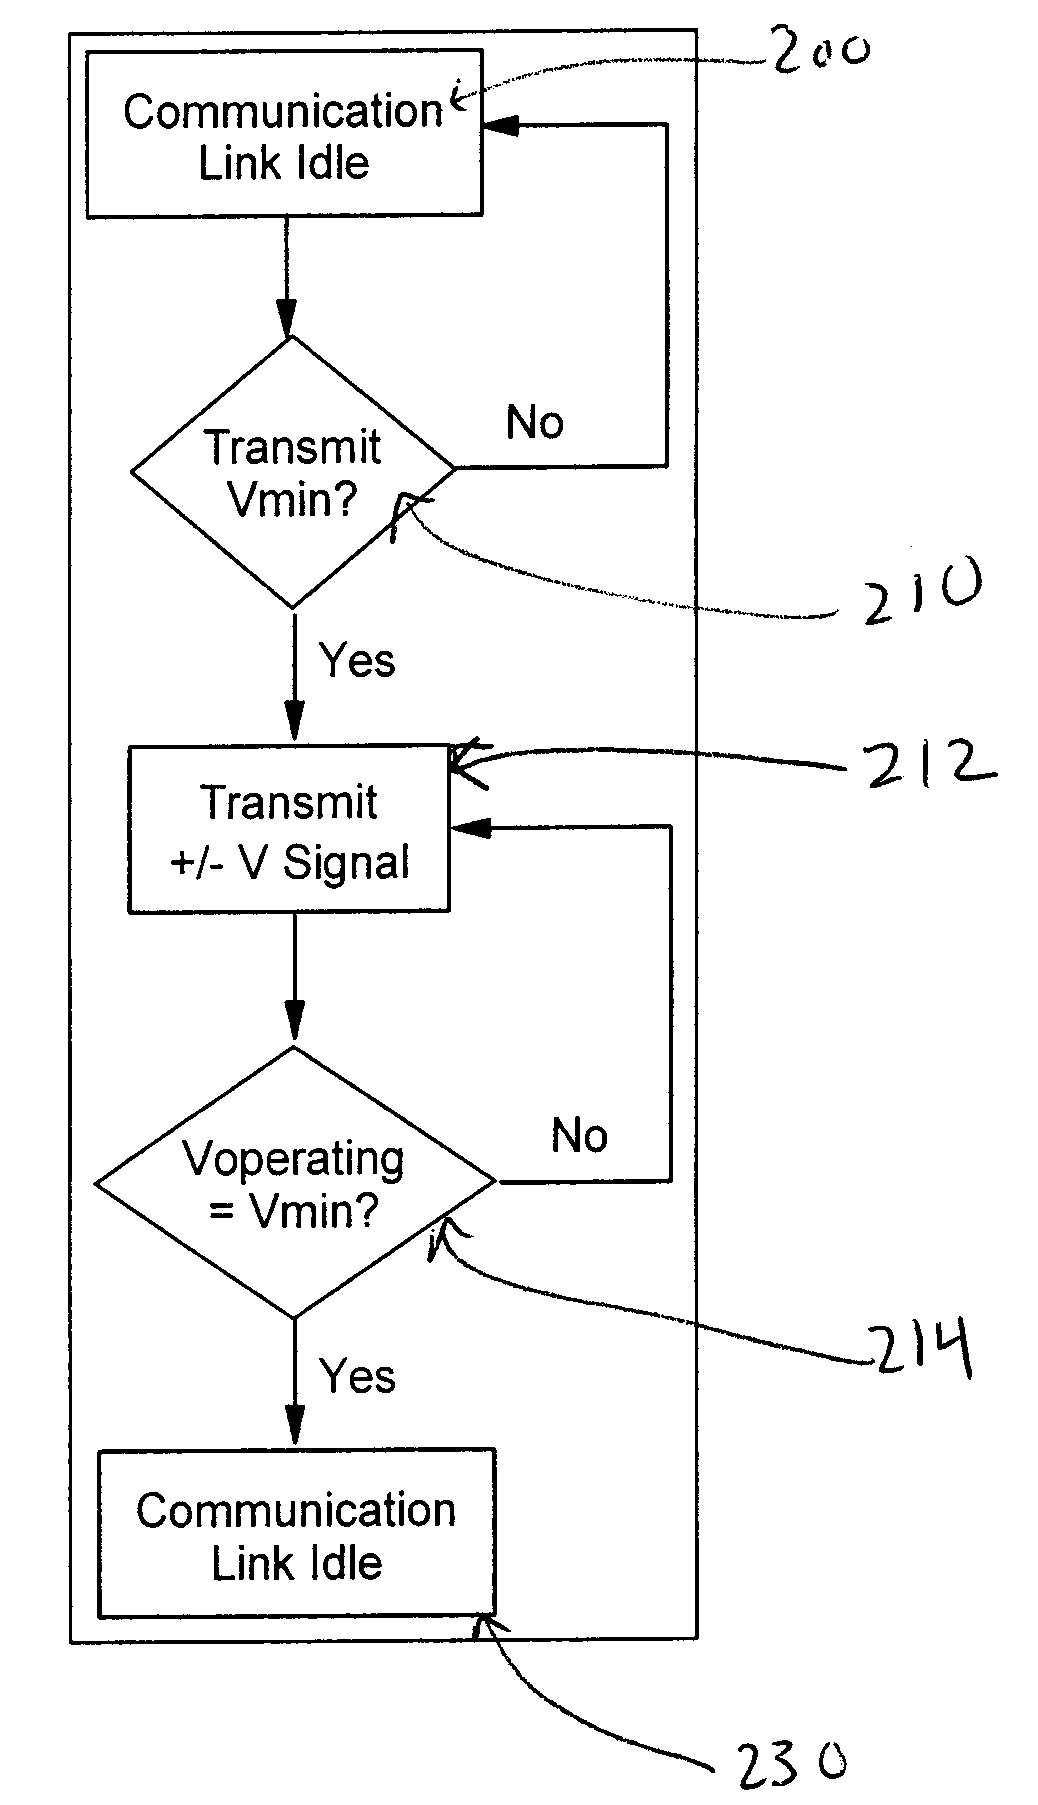 System and method of controlling power consumption in an electronic system by applying a uniquely determined minimum operating voltage to an integrated circuit rather than a predetermined nominal voltage selected for a family of integrated circuits